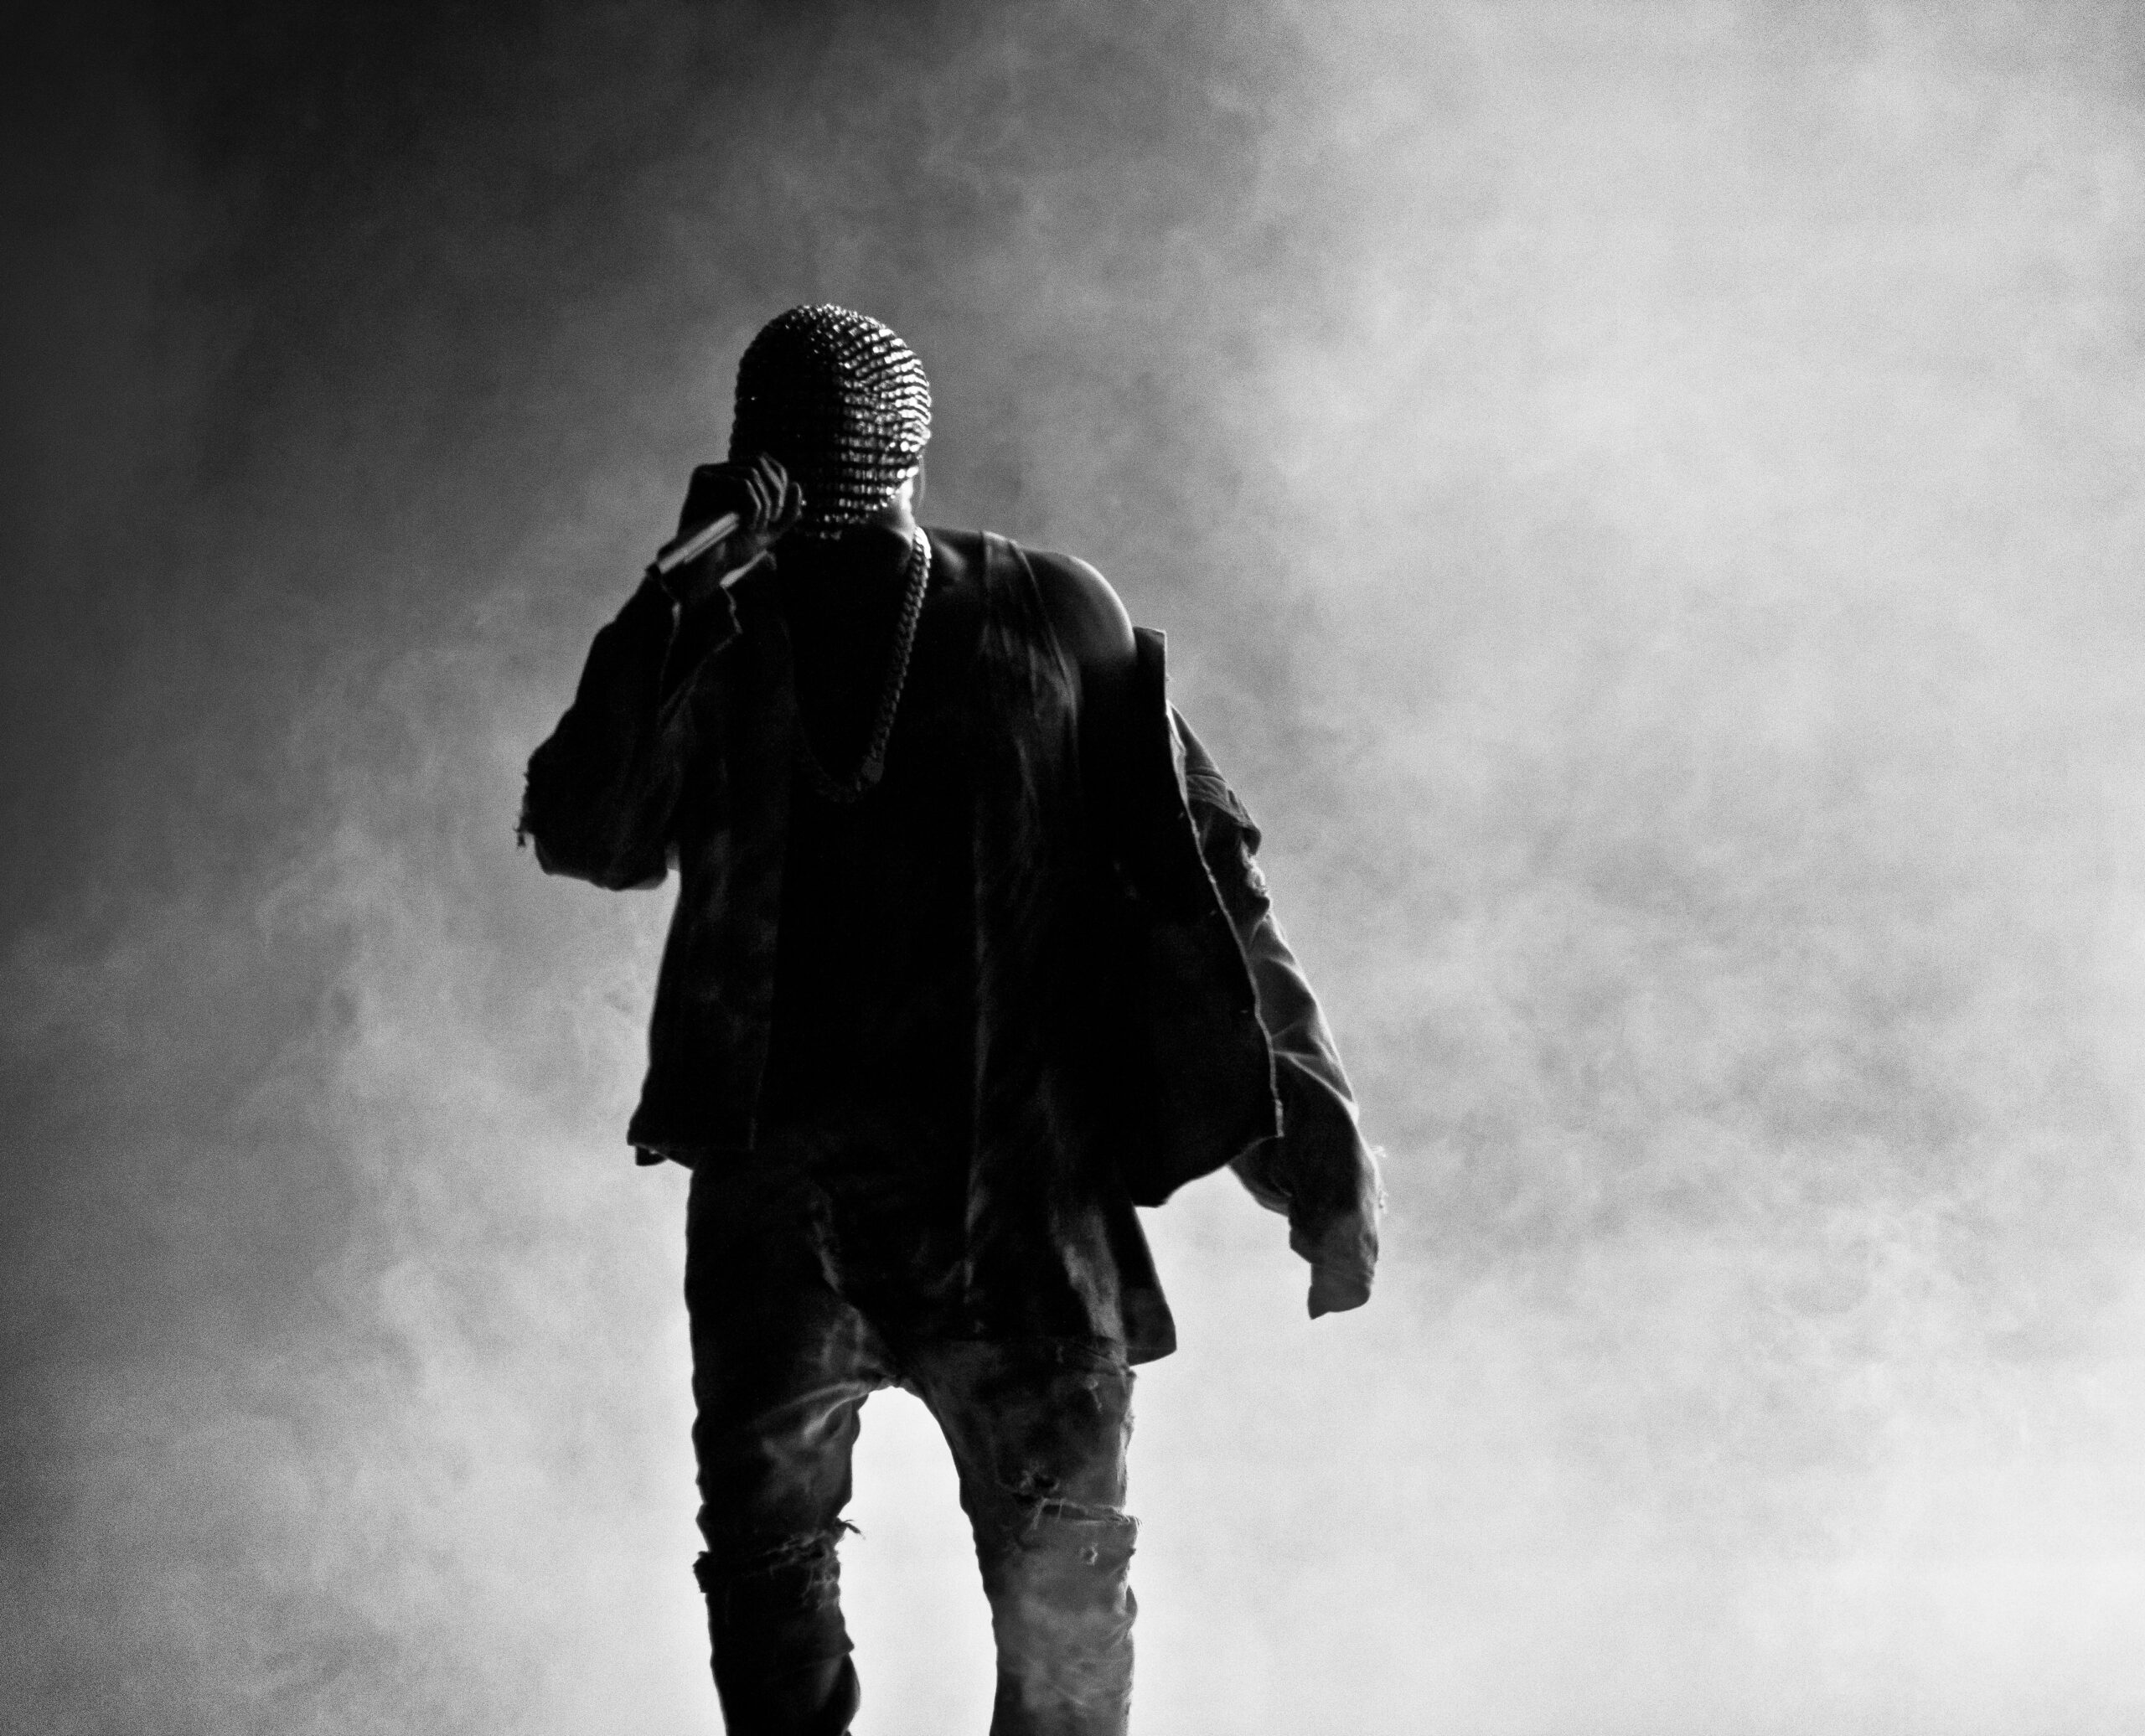 ‘’Donda,” a New and More Mature Kanye West?